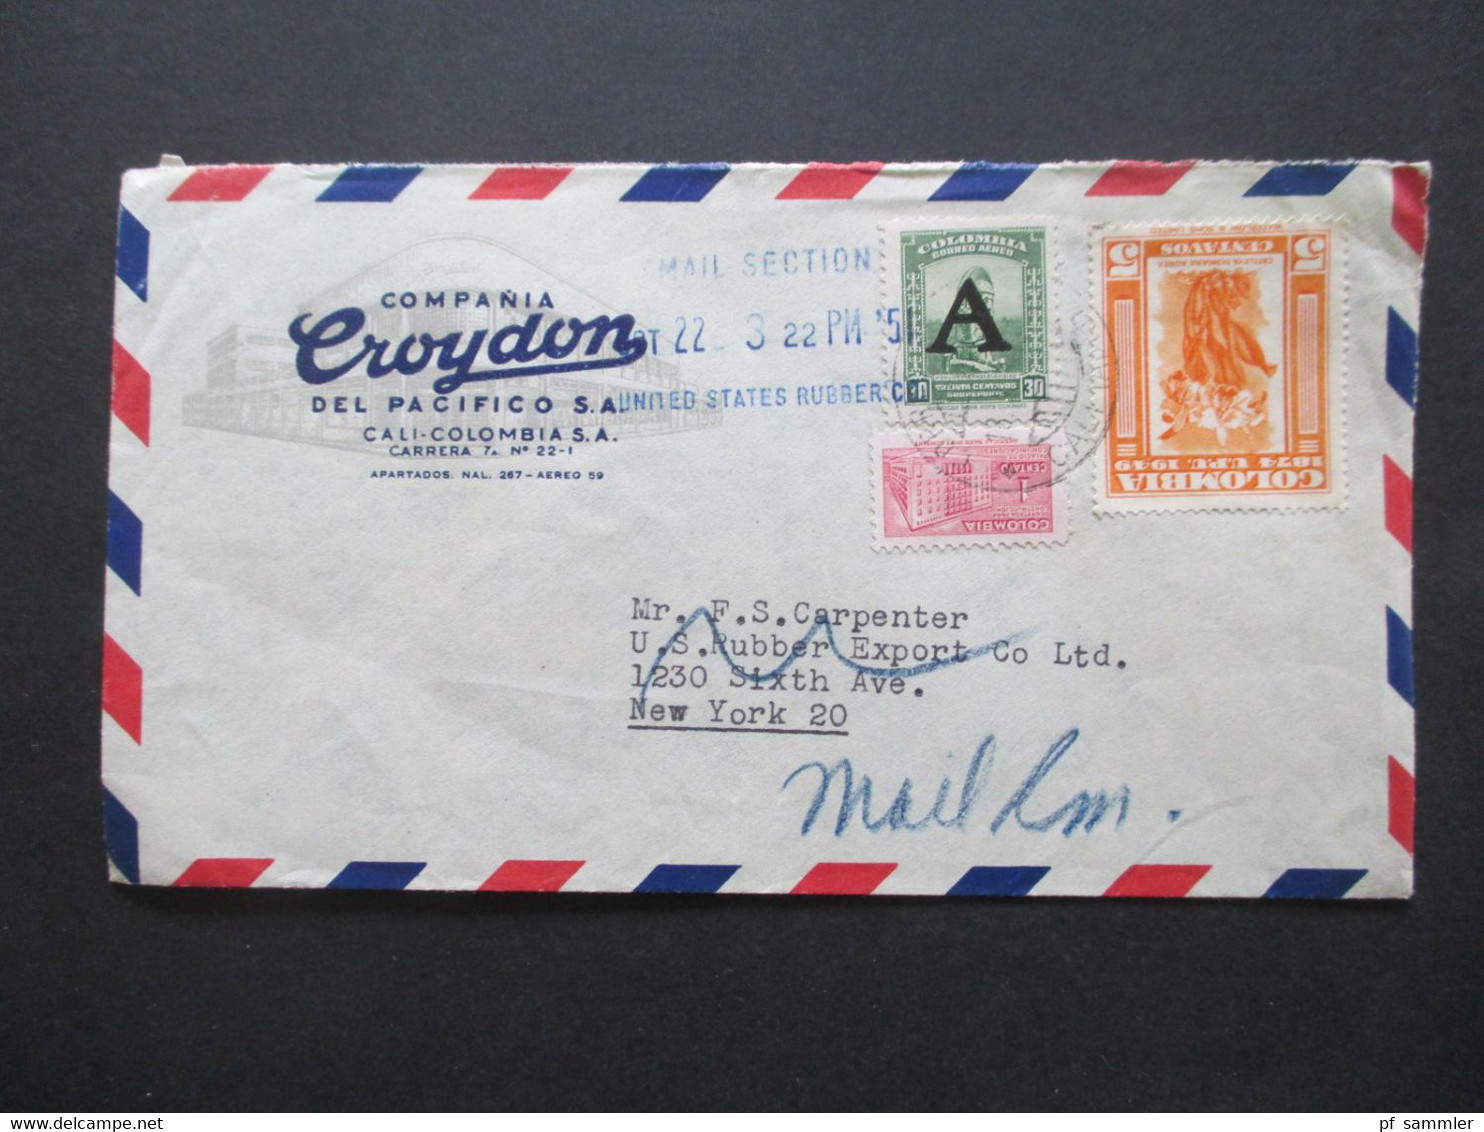 Kolumbien Colombia 1951 Firmenumschlag Compania Croydon Del Pacifico S.A. Blauer Eingangsstempel Mail Section Rubber - Colombia